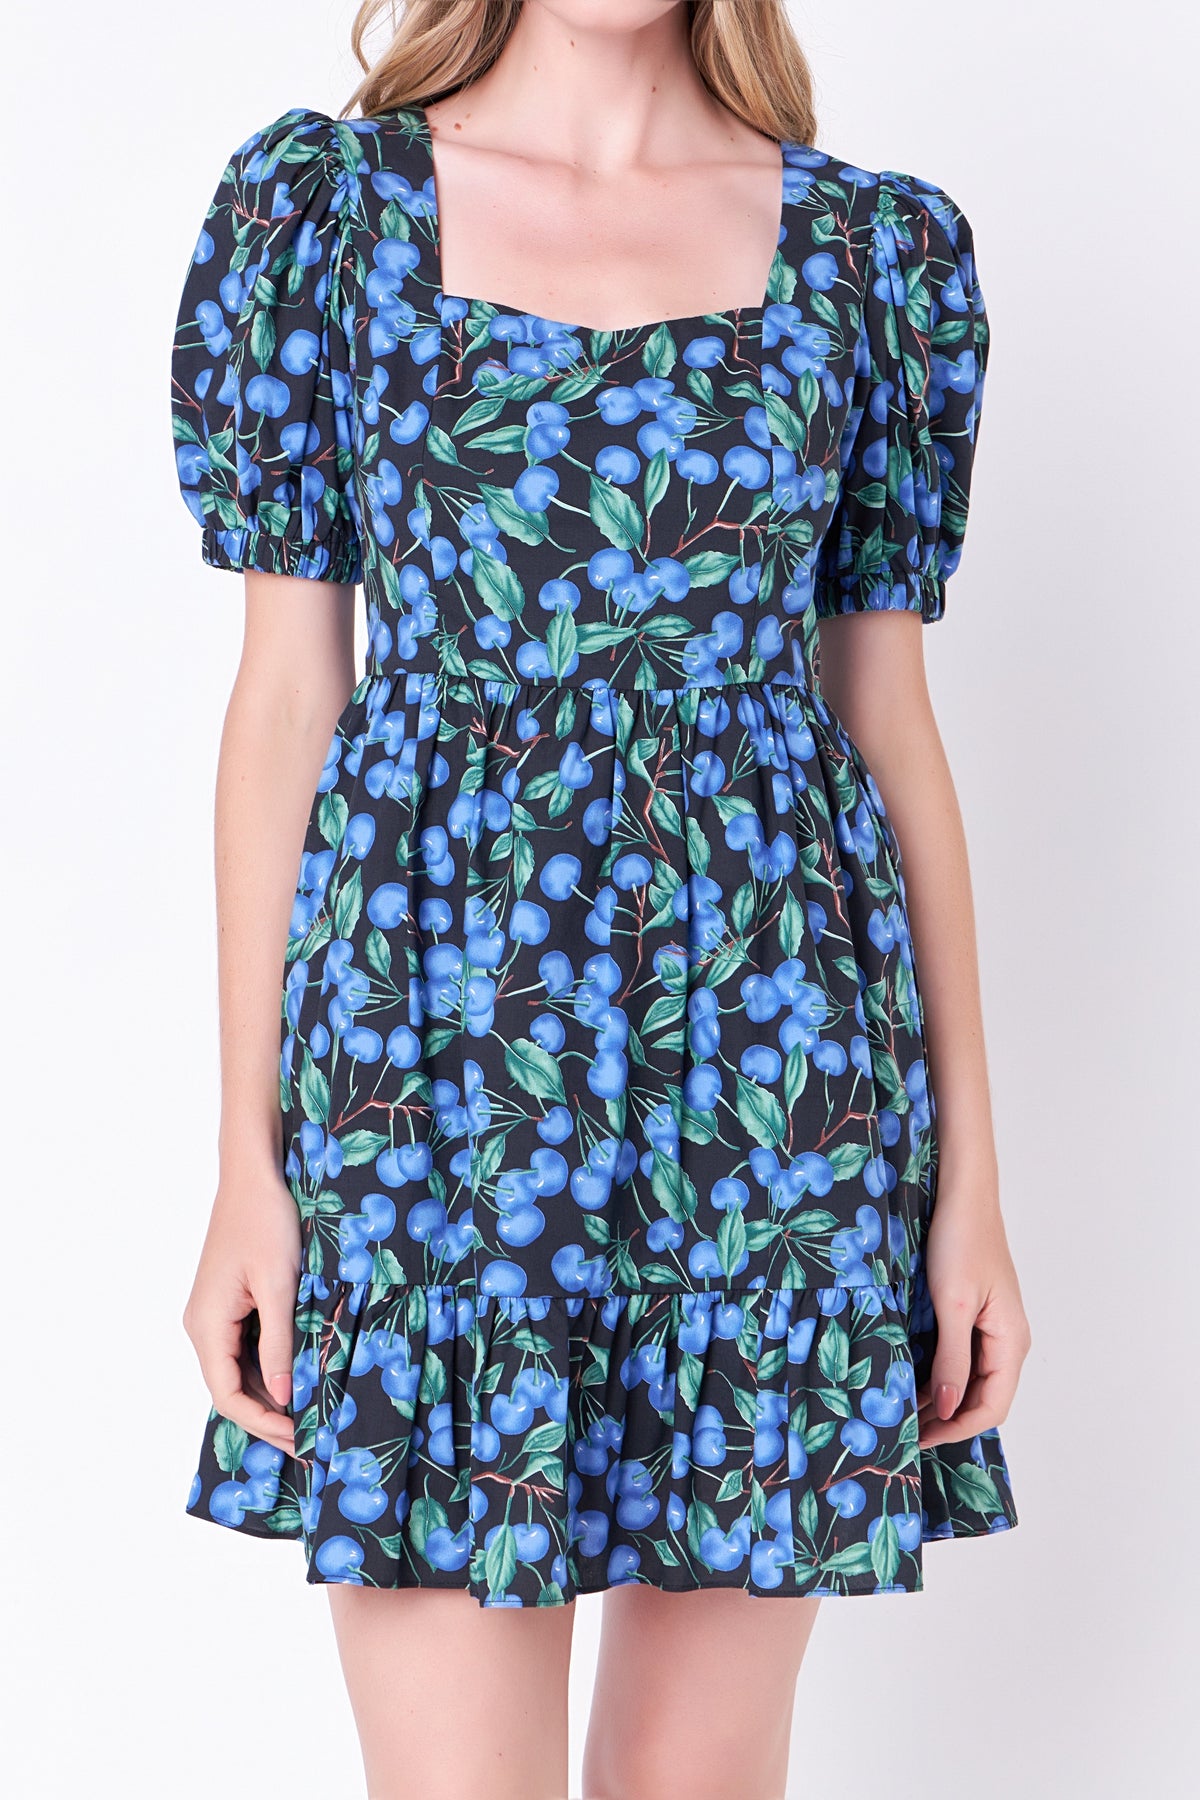 ENGLISH FACTORY - Blueberry Print Mini Dress with Puff Sleeves - DRESSES available at Objectrare